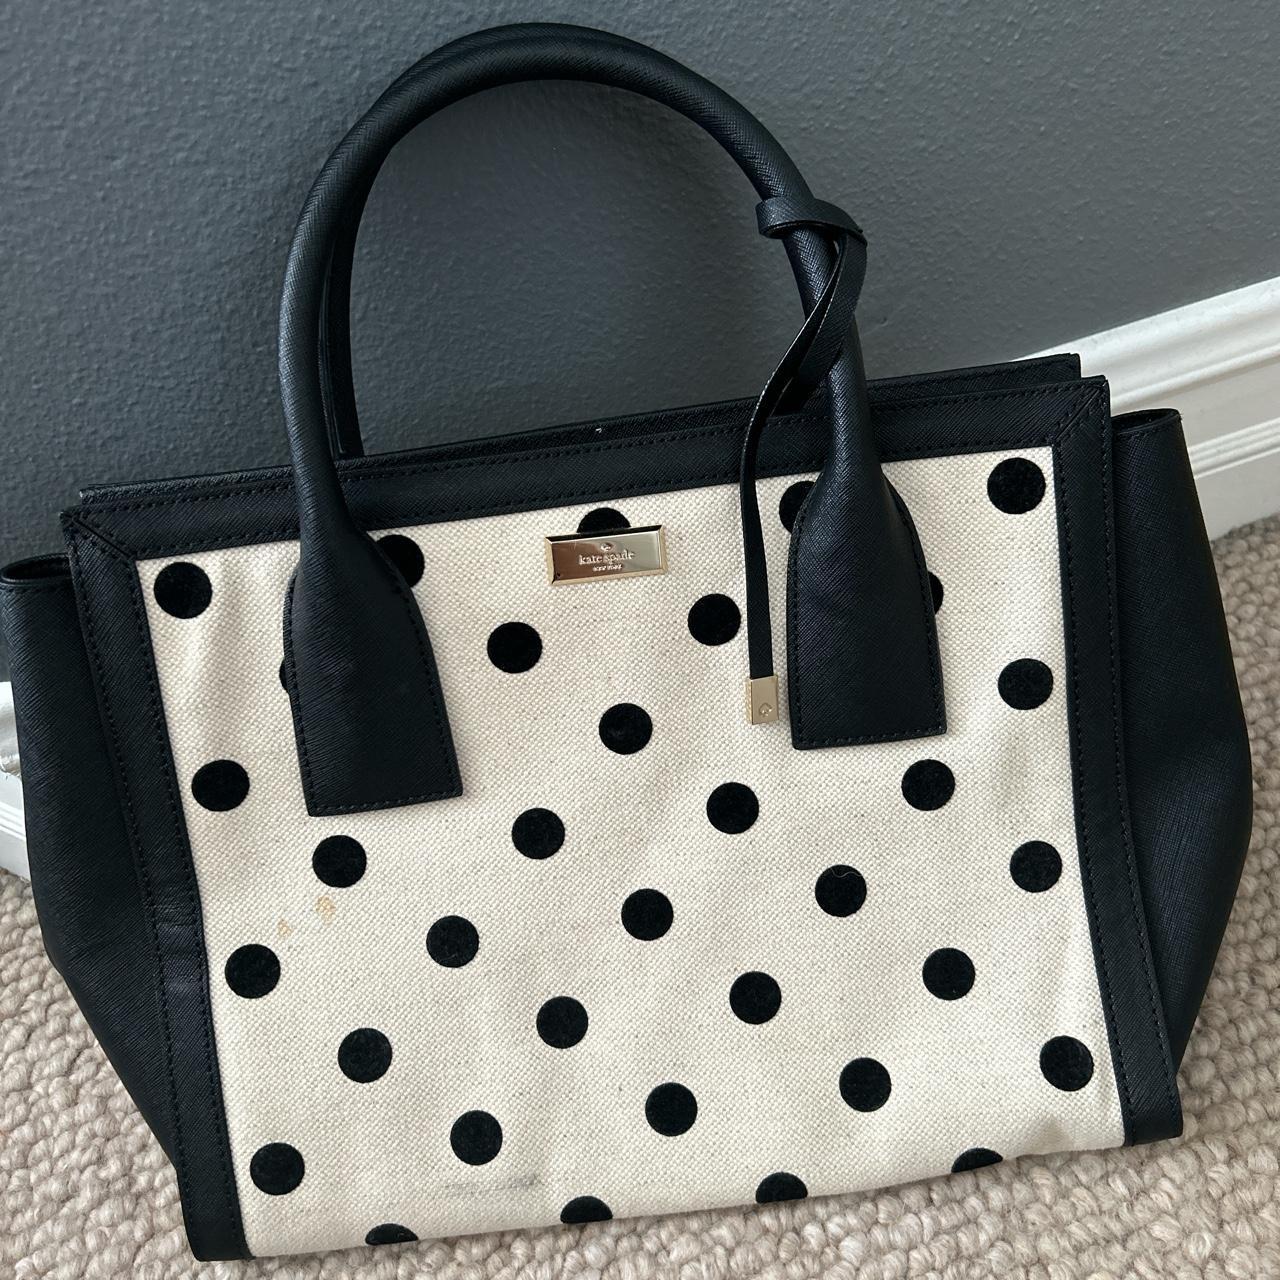 Buy the Kate Spade Domed Black Saffiano Leather Tote Bag | GoodwillFinds